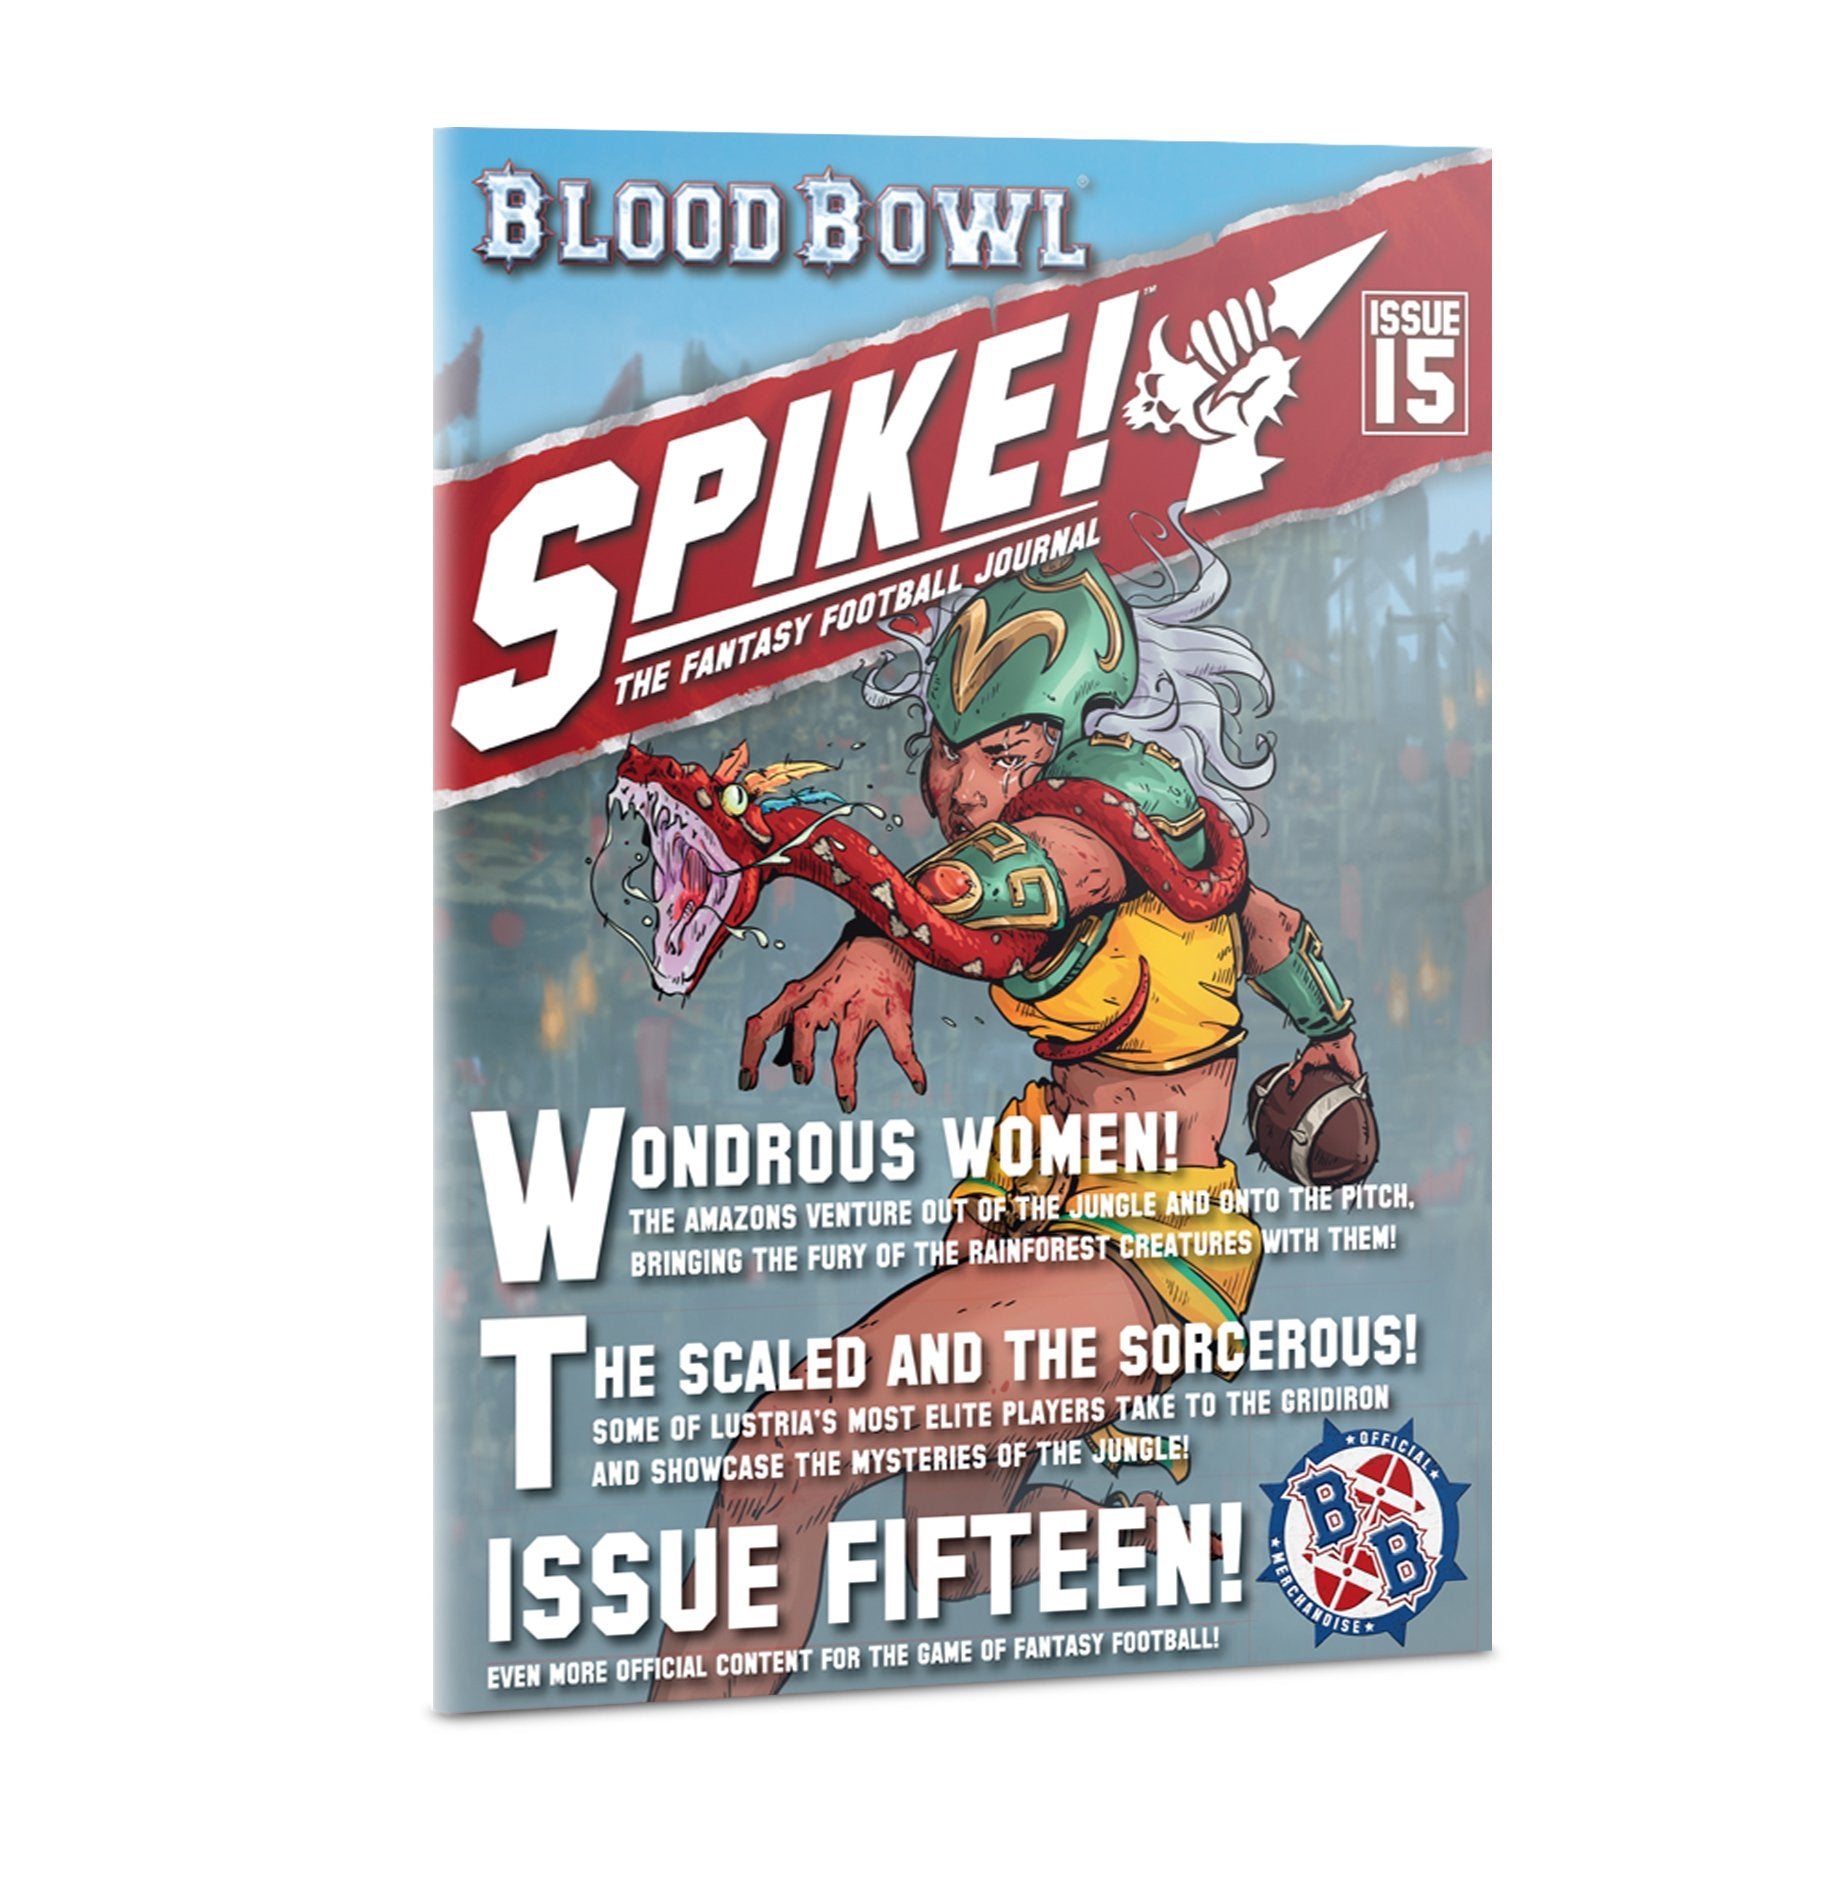 Blood Bowl Spike! Journal Issue 15 | Jack's On Queen